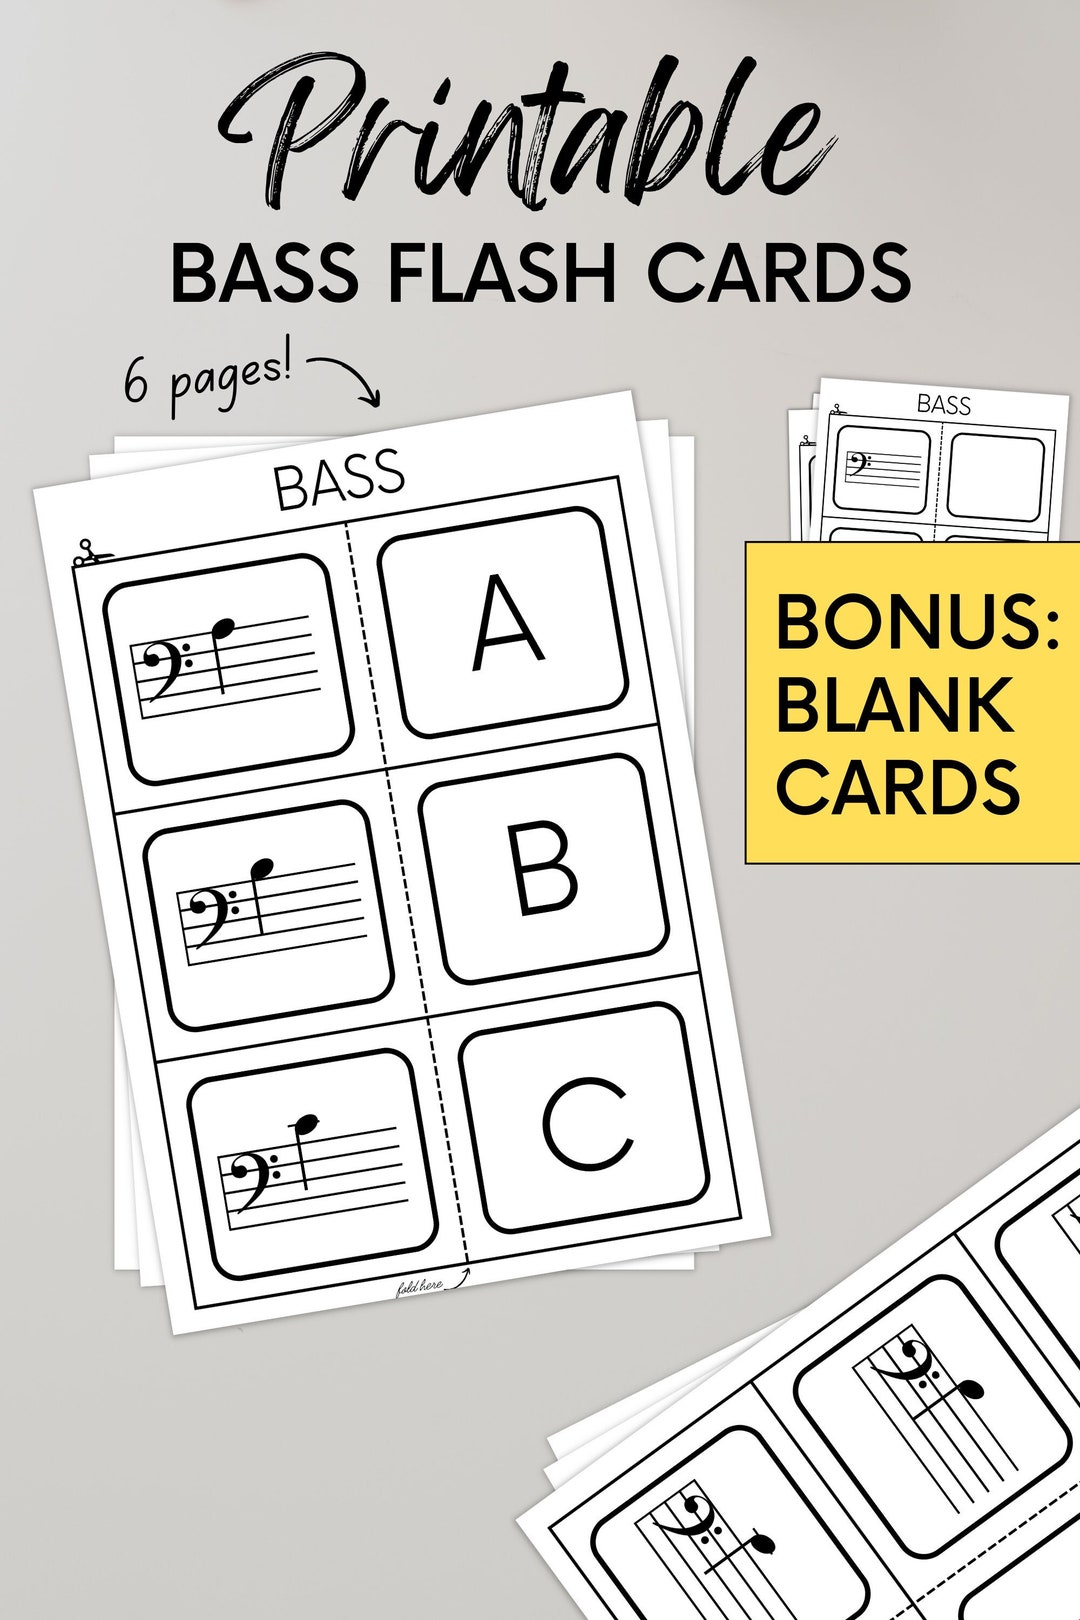 bass-clef-flashcards-for-beginner-musicians-who-want-to-learn-music